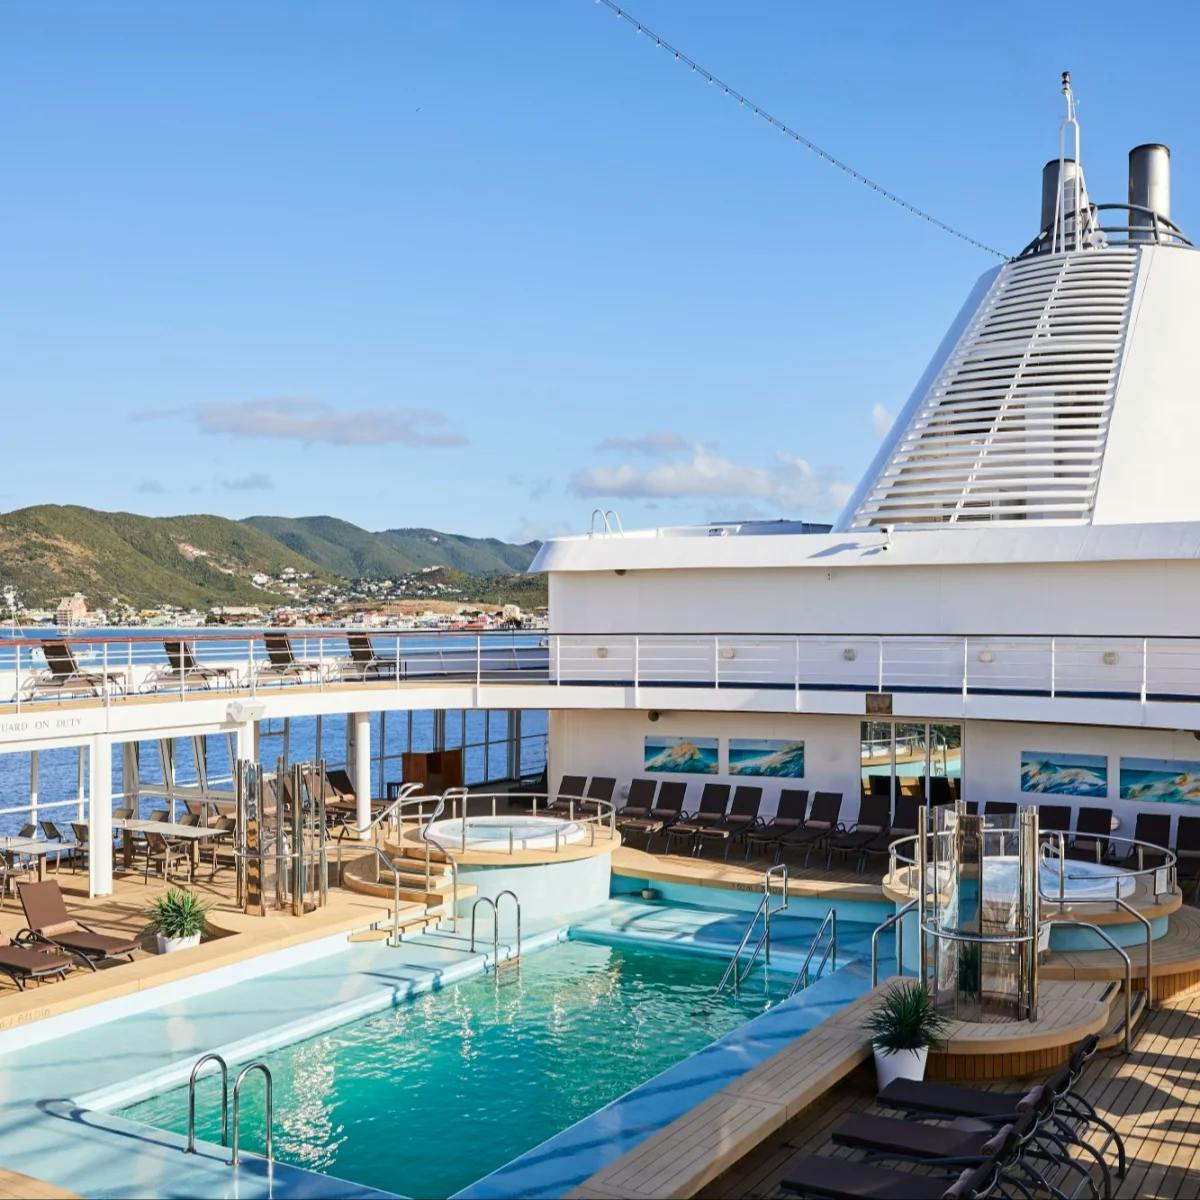 a cruise pool deck with lounge chairs